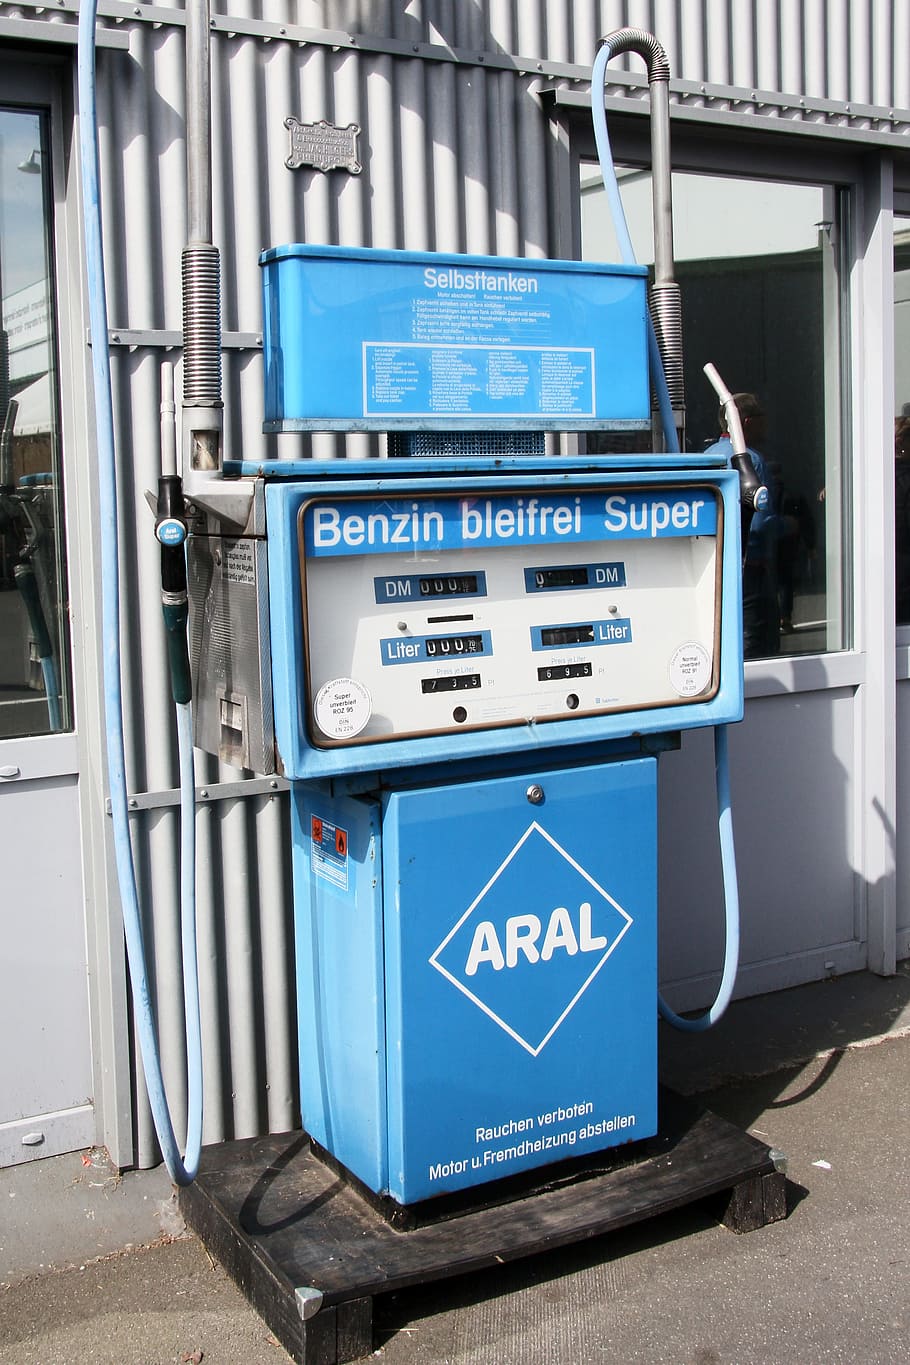 Aral, Petrol Stations, Old, Museum, old, museum, old gas station, gas pump, historically, fuel, refuel